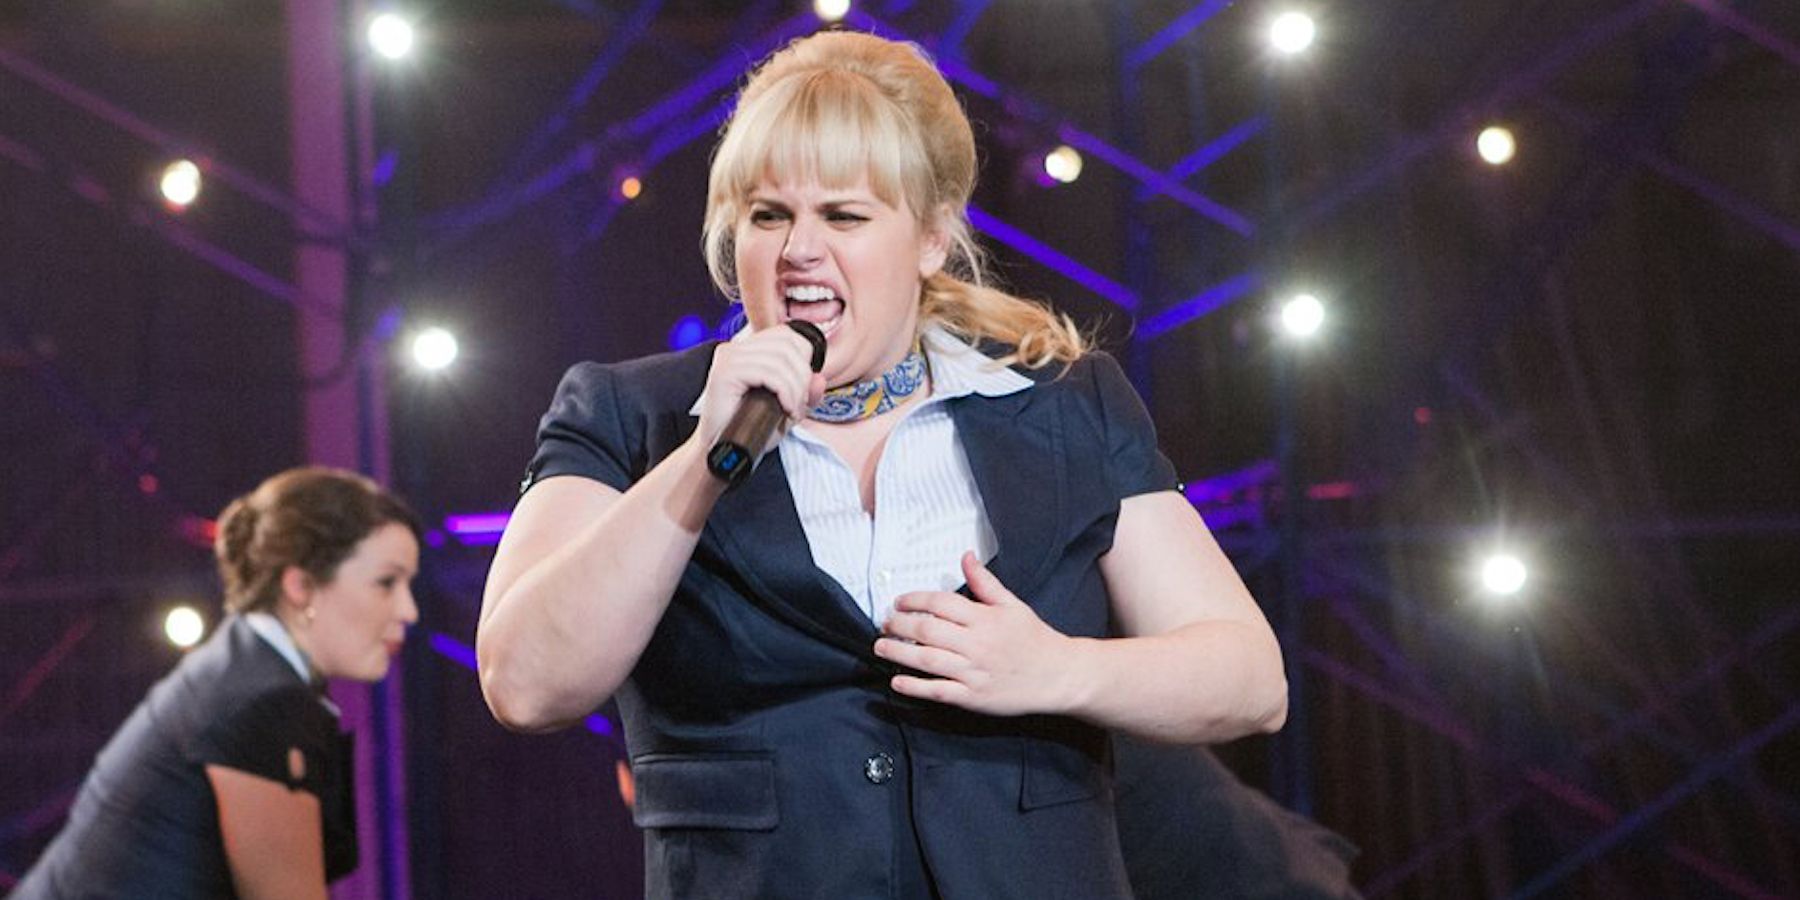 Amy performing on stage In Pitch Perfect